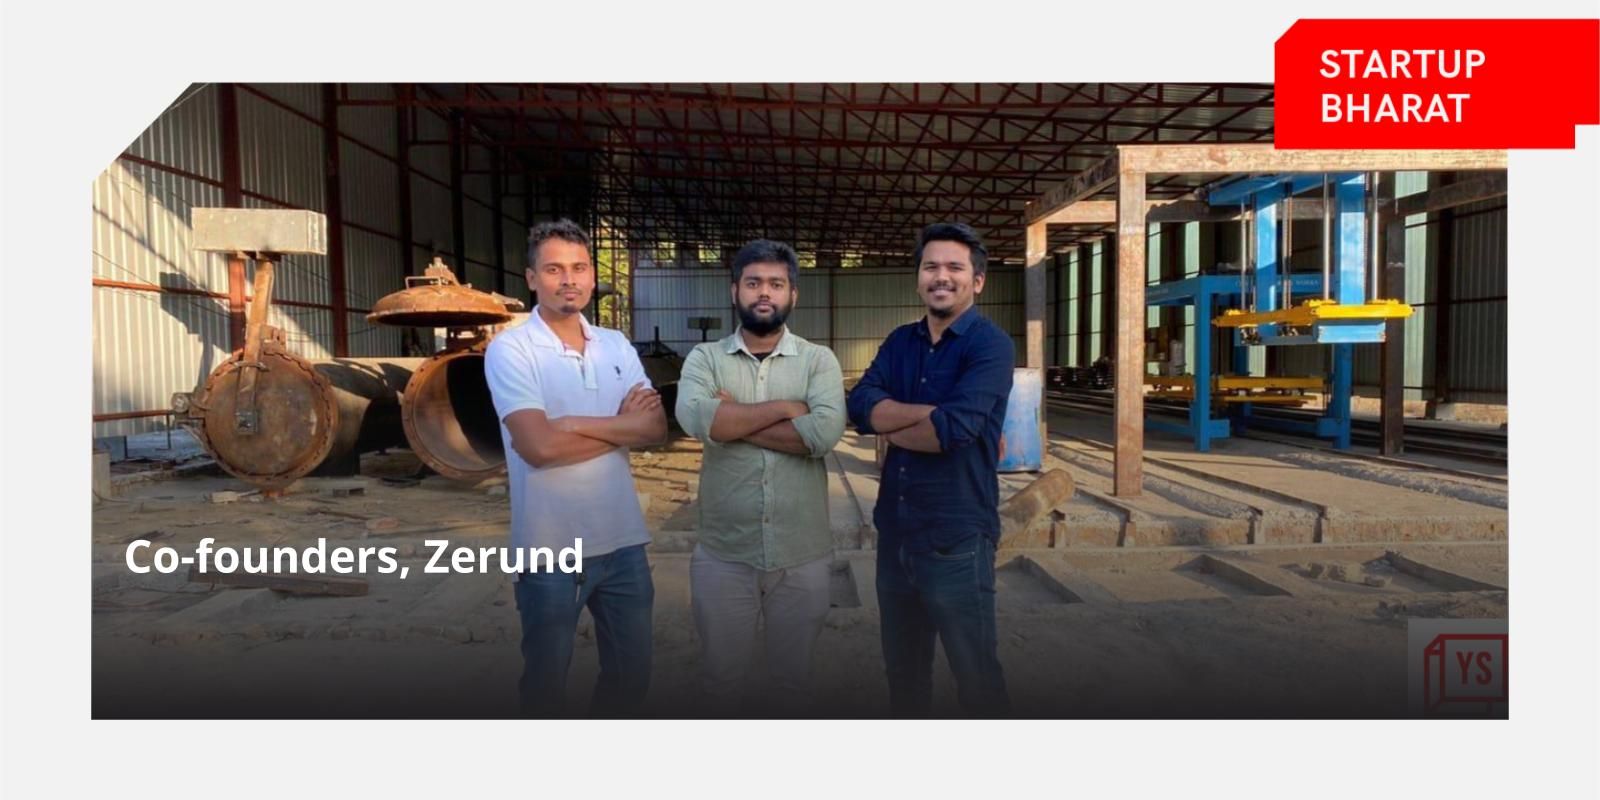 [Startup Bharat] Why these young entrepreneurs from Assam have tapped into waste plastic to manufacture eco-friendly bricks 